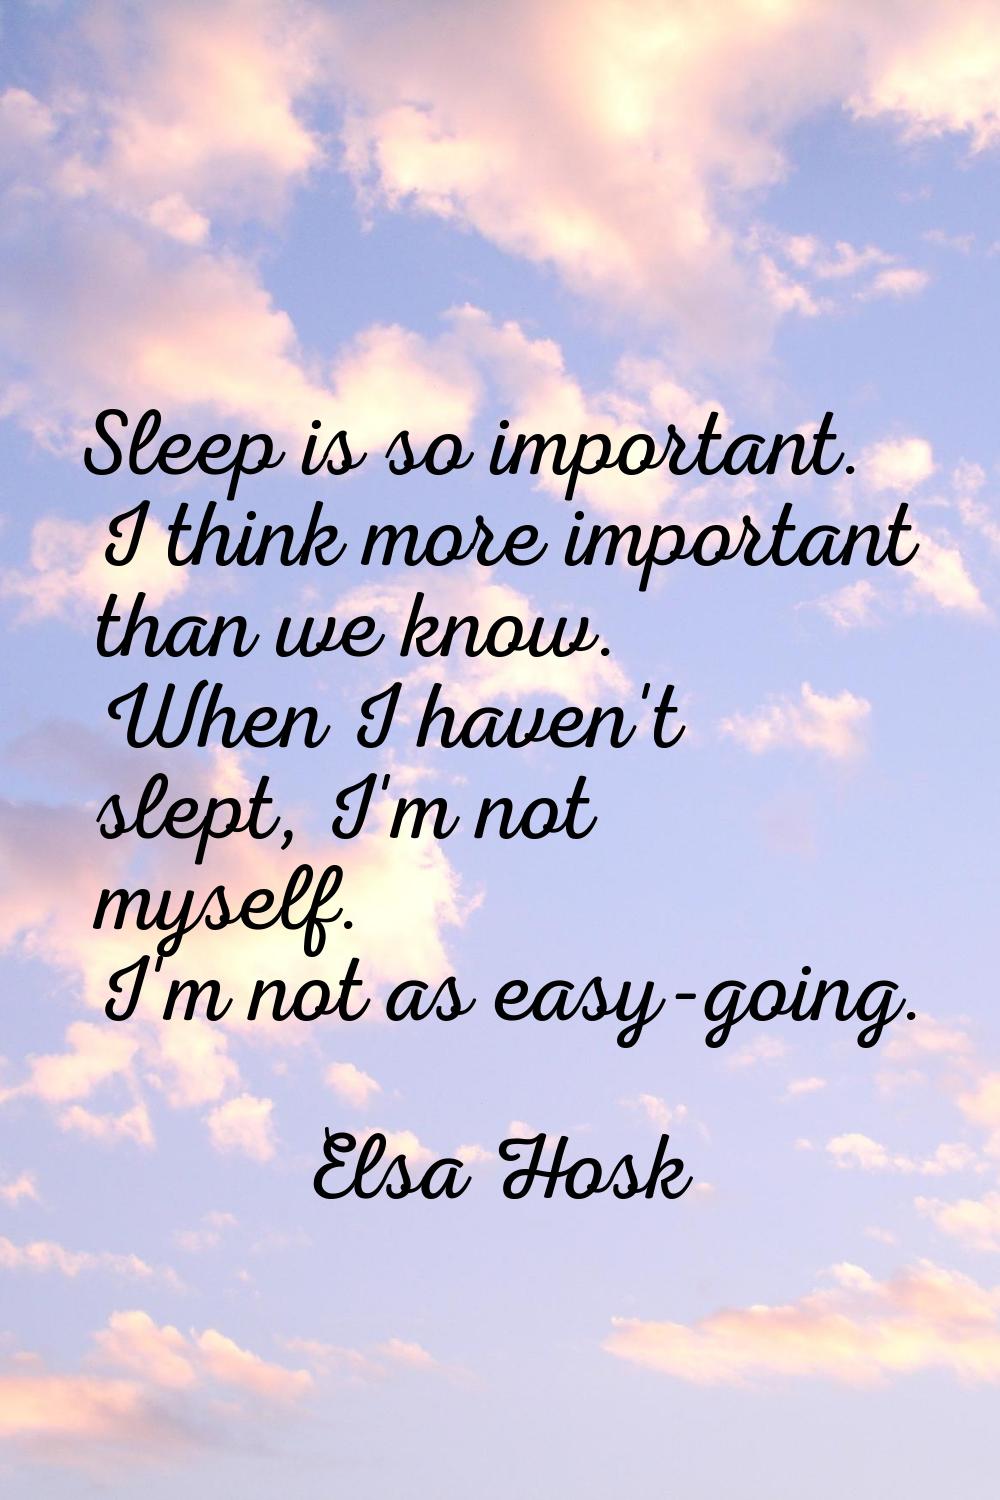 Sleep is so important. I think more important than we know. When I haven't slept, I'm not myself. I